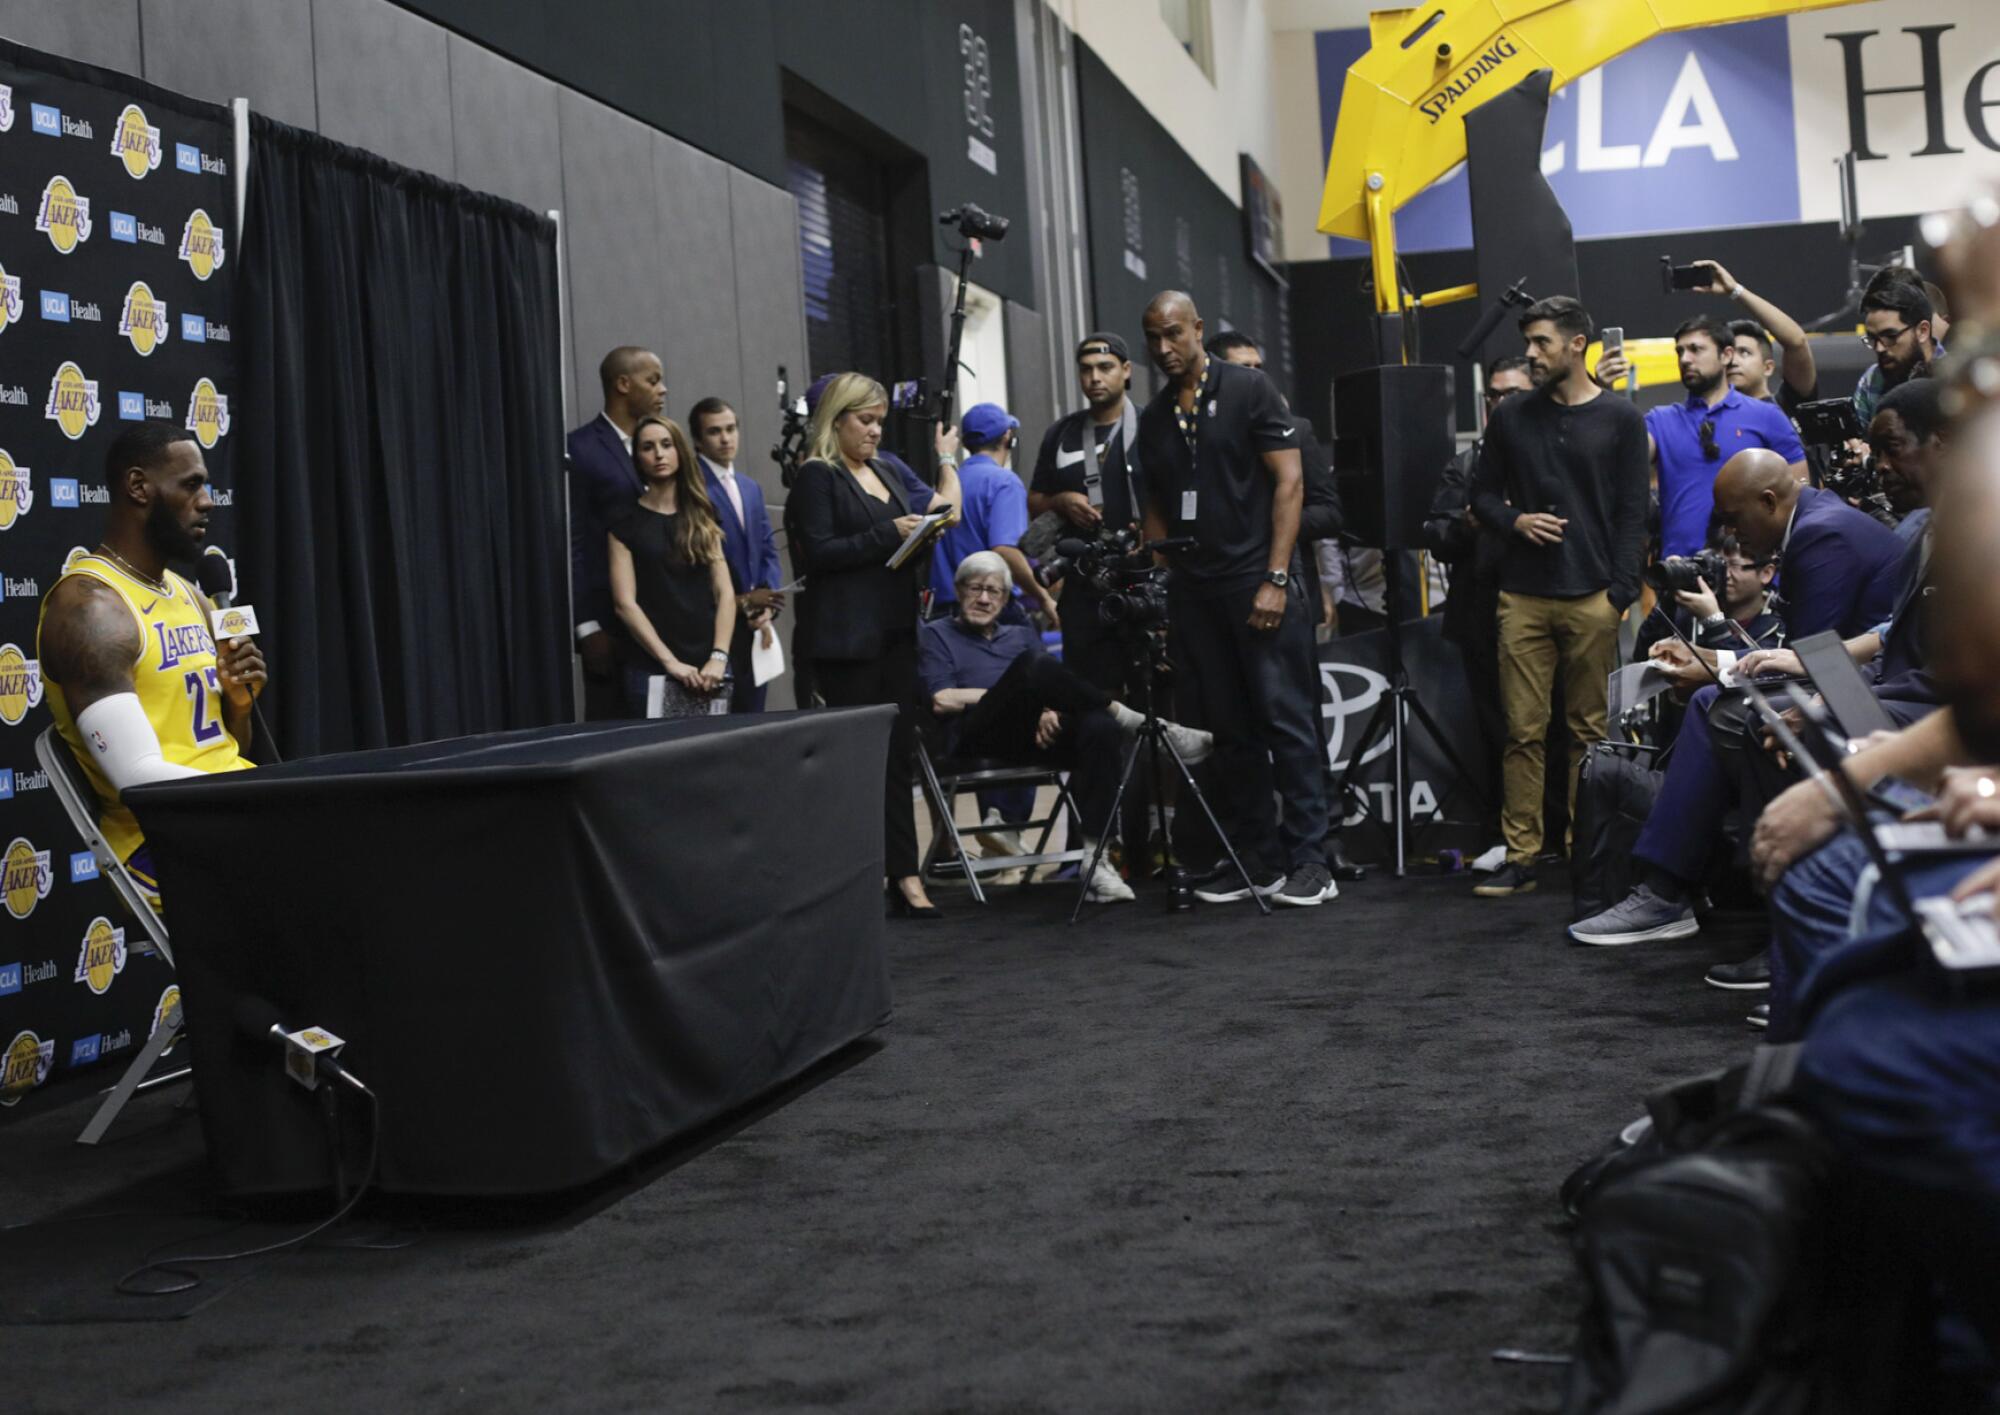 LeBron James, in Lakers uniform, sits behind a table holding a microphone. Media members are packed nearby. 